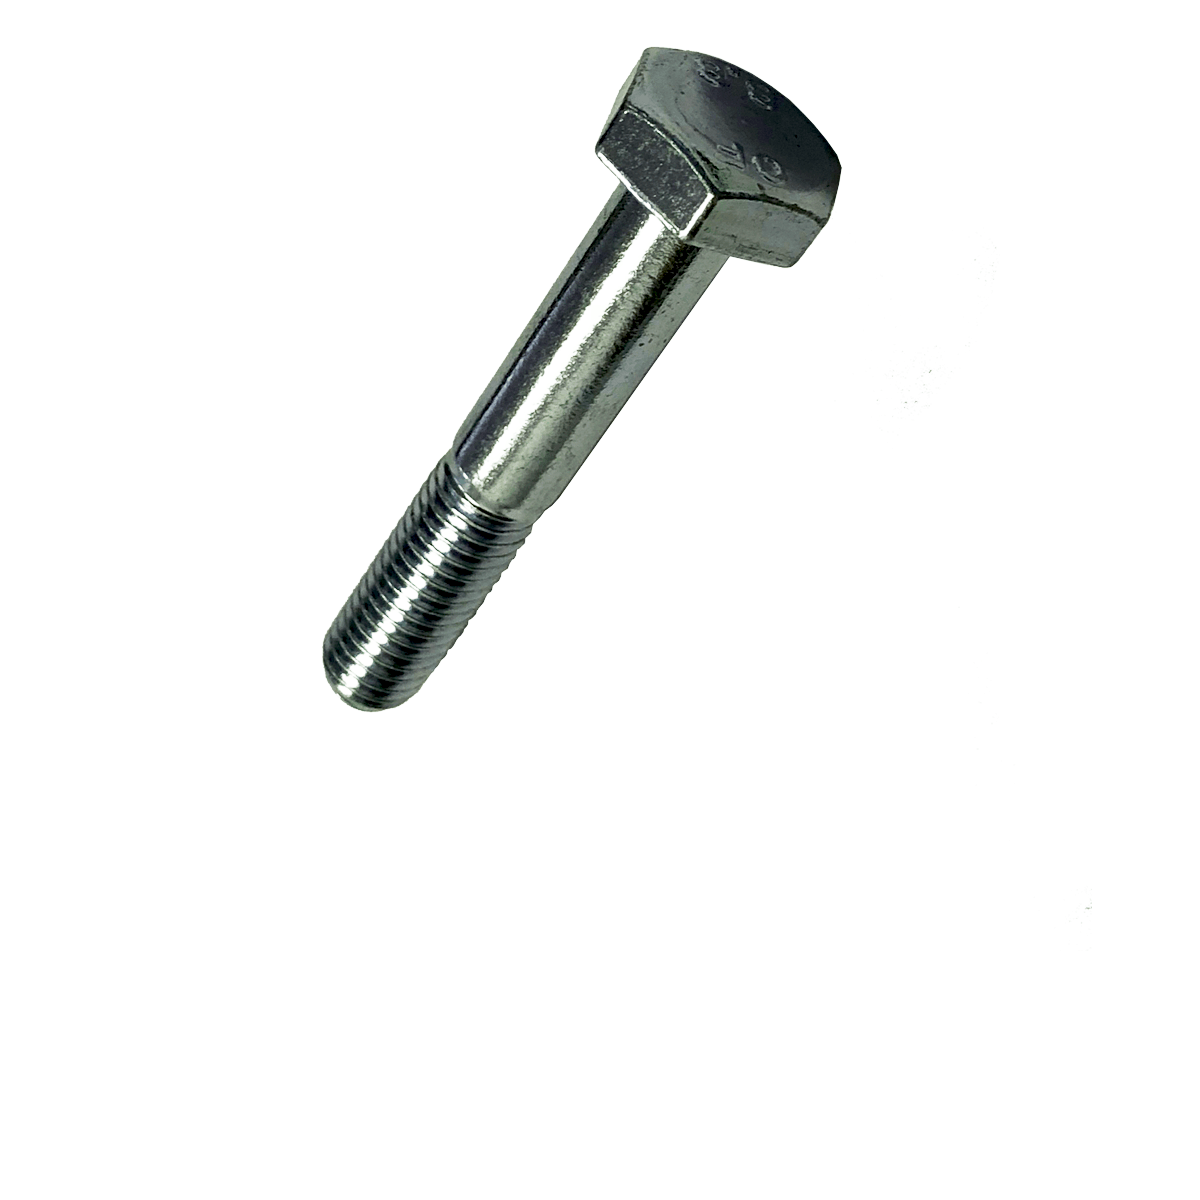 DIN 931. Hex Bolt M8 x < 100mm A2/ 304 Stainless Steel 